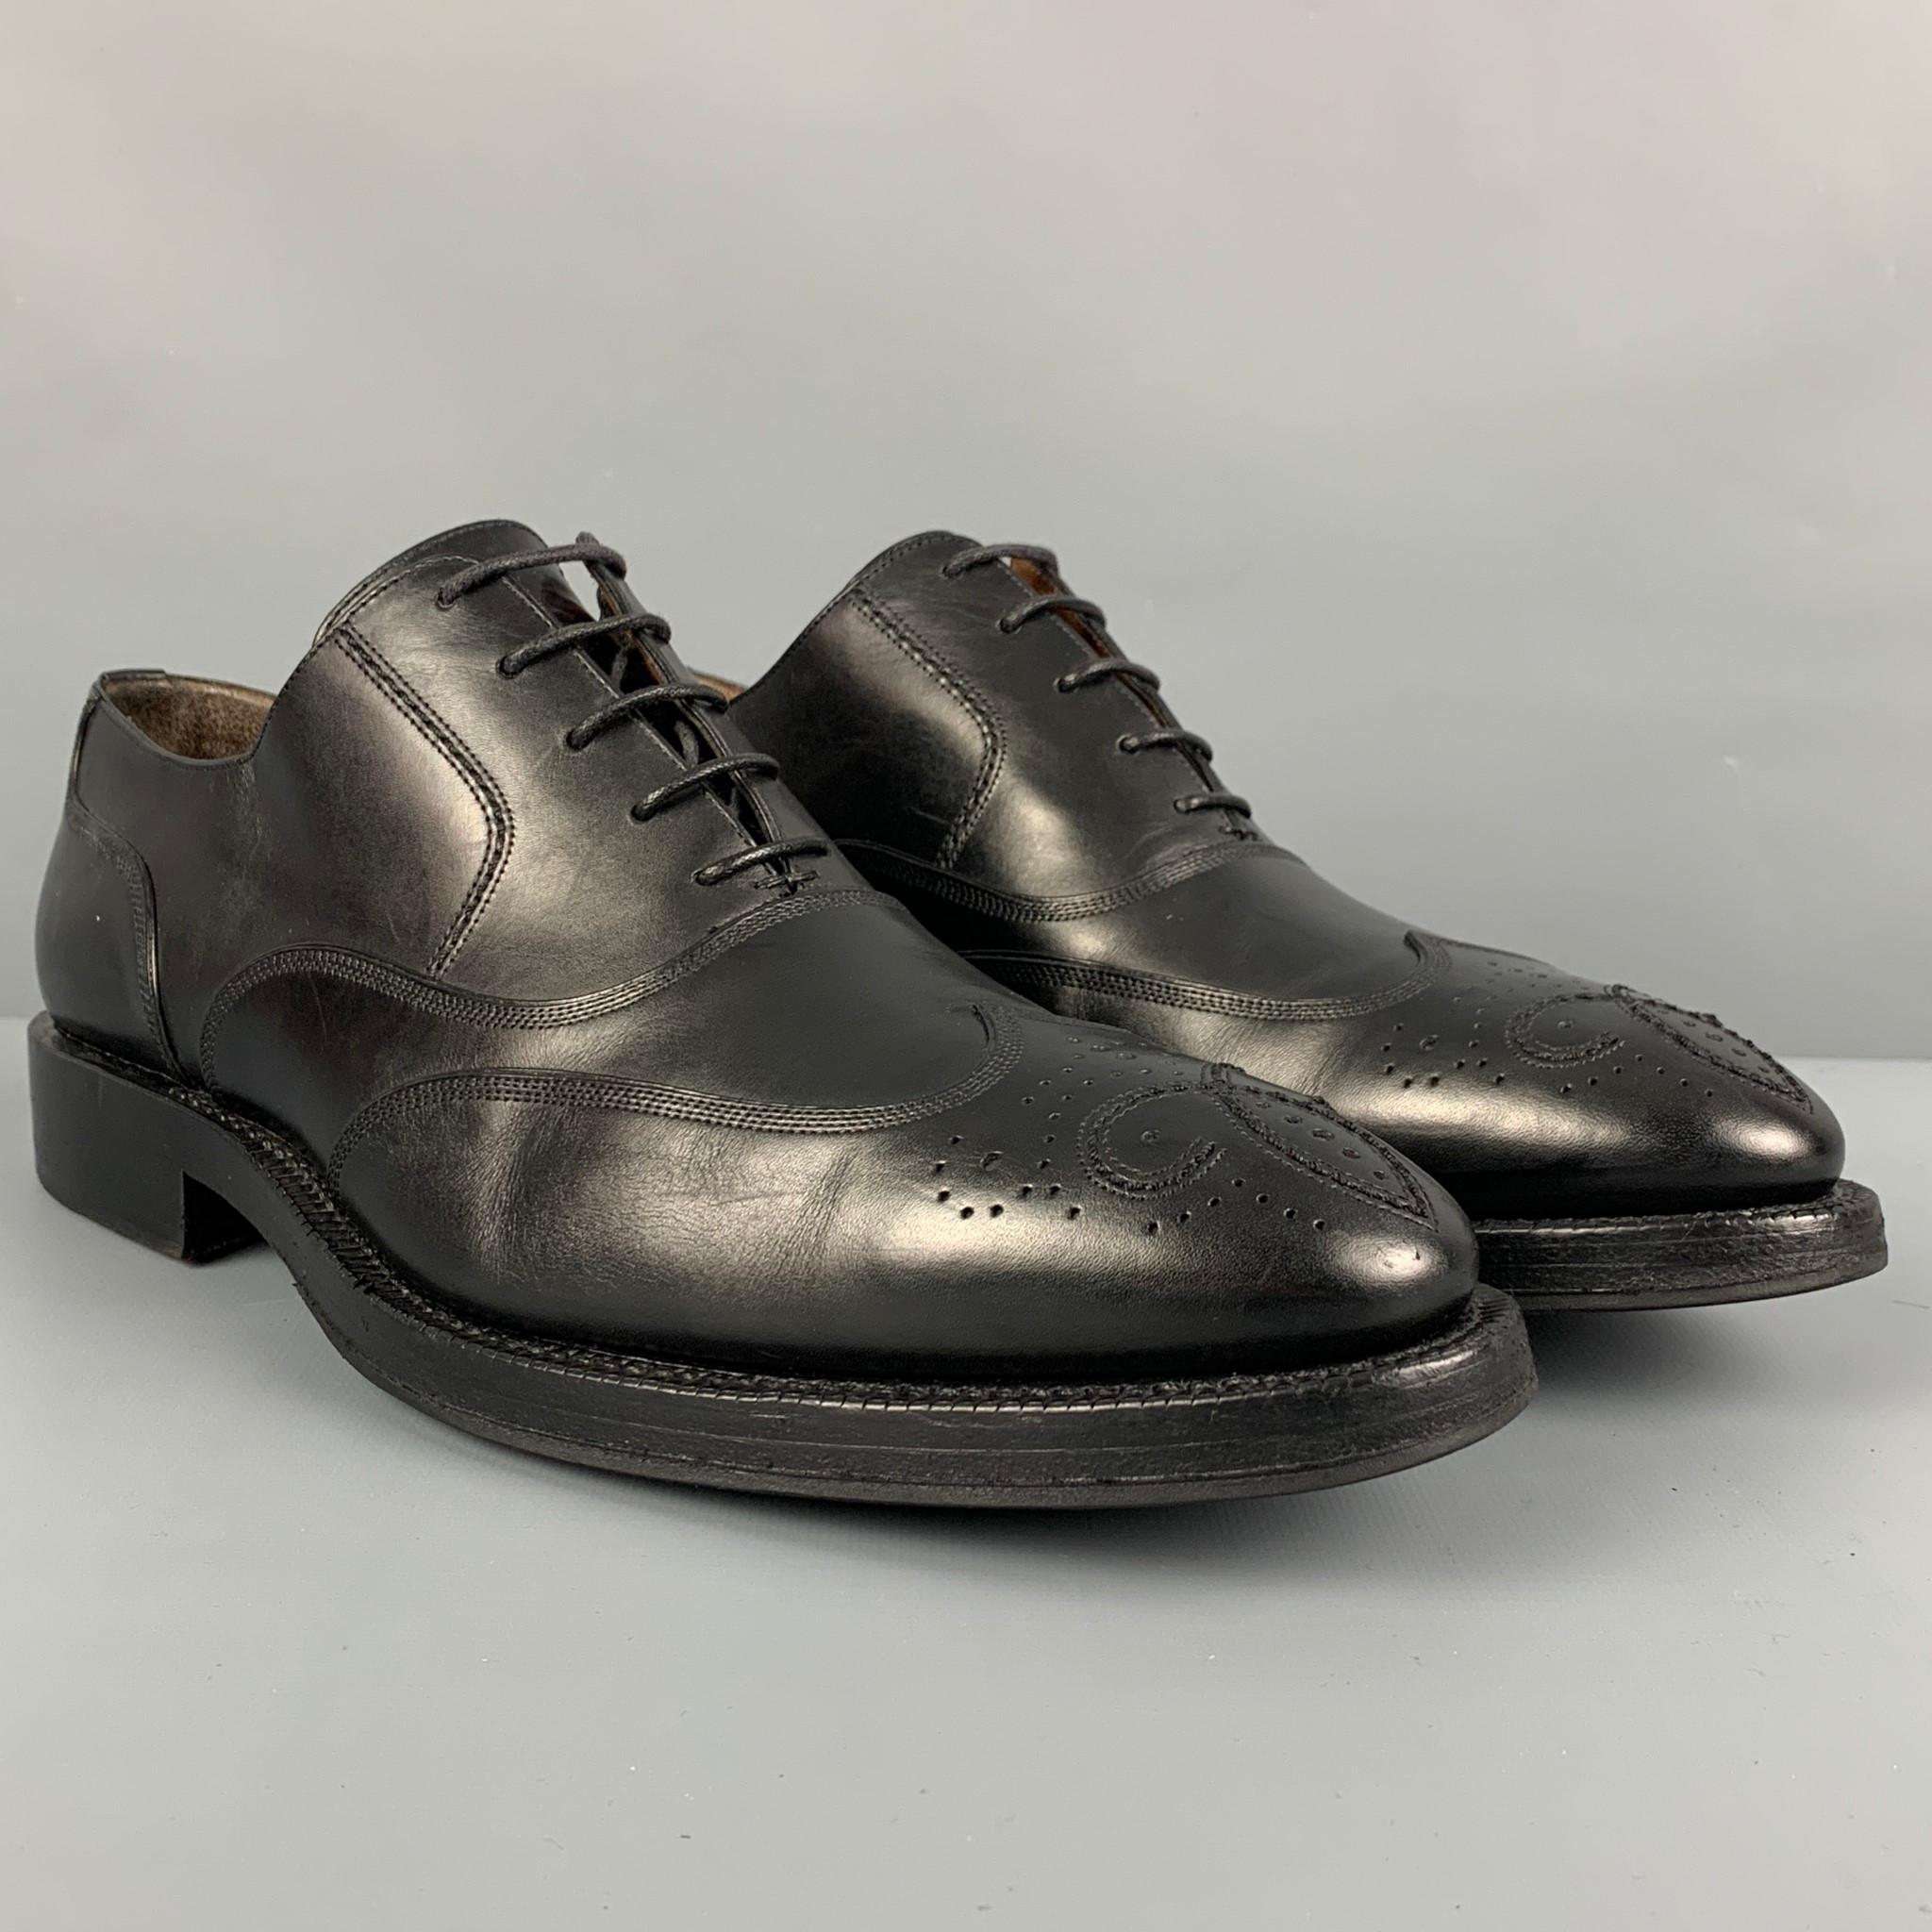 BALLY shoes comes in a black leather featuring a wingtip style and a lace up closure. Made in Italy. 

Very Good Pre-Owned Condition.
Marked: EU 7.5 RE / US 8.5 D

Outsole: 12.5 in. x 4.25 in. 